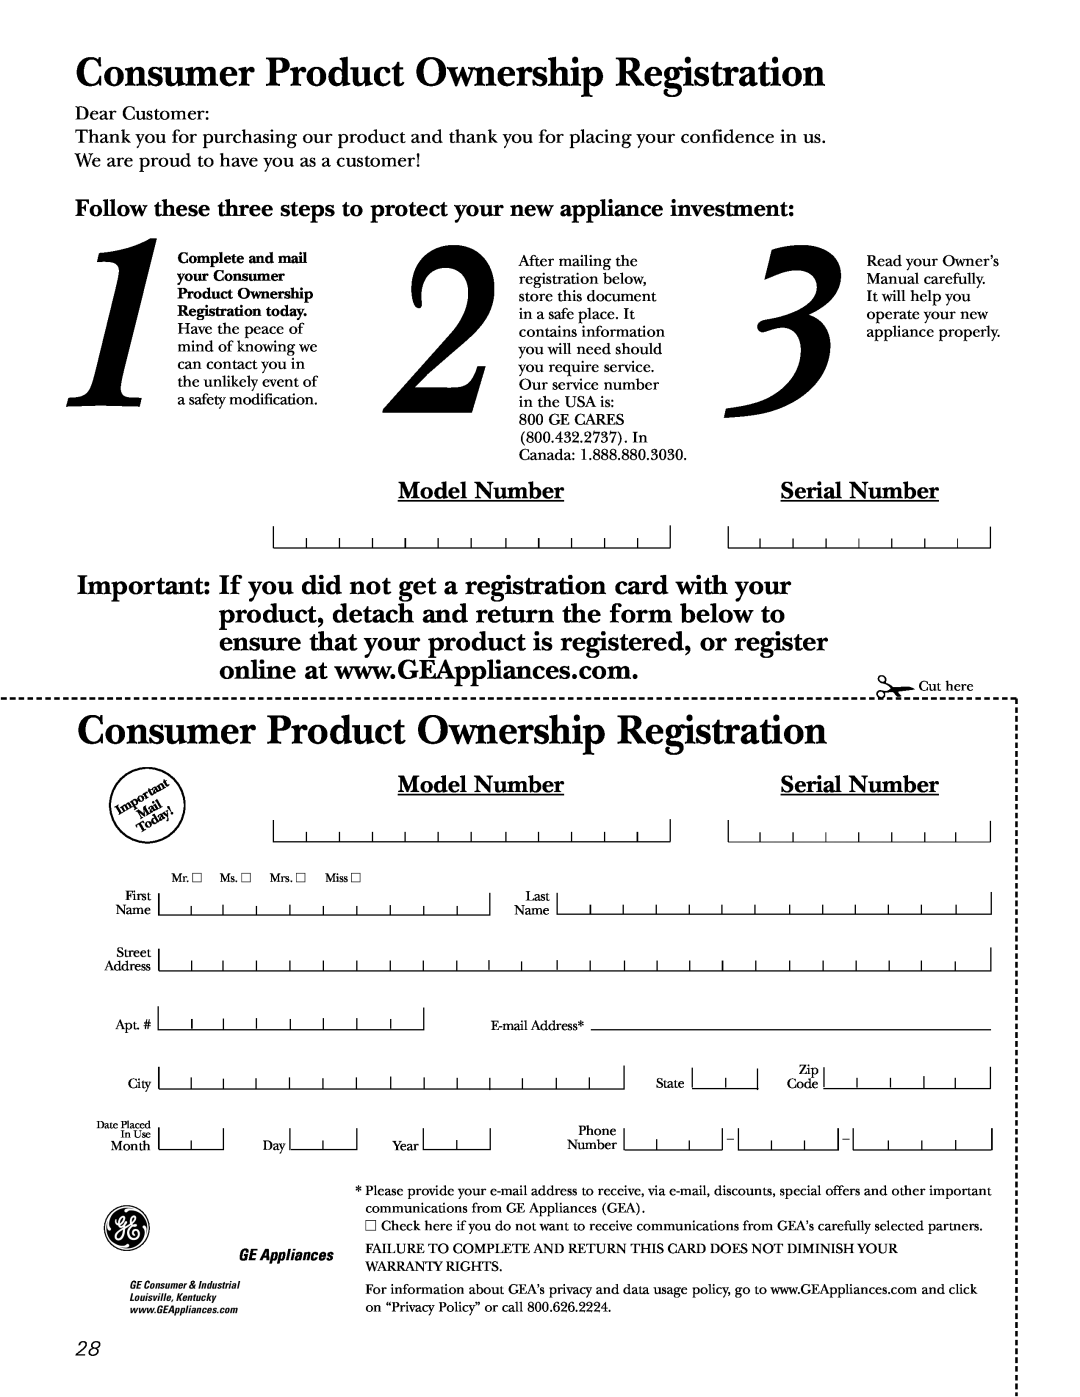 GE 17 Model Number, Serial Number, Consumer Product Ownership Registration, Complete and mail, your Consumer 